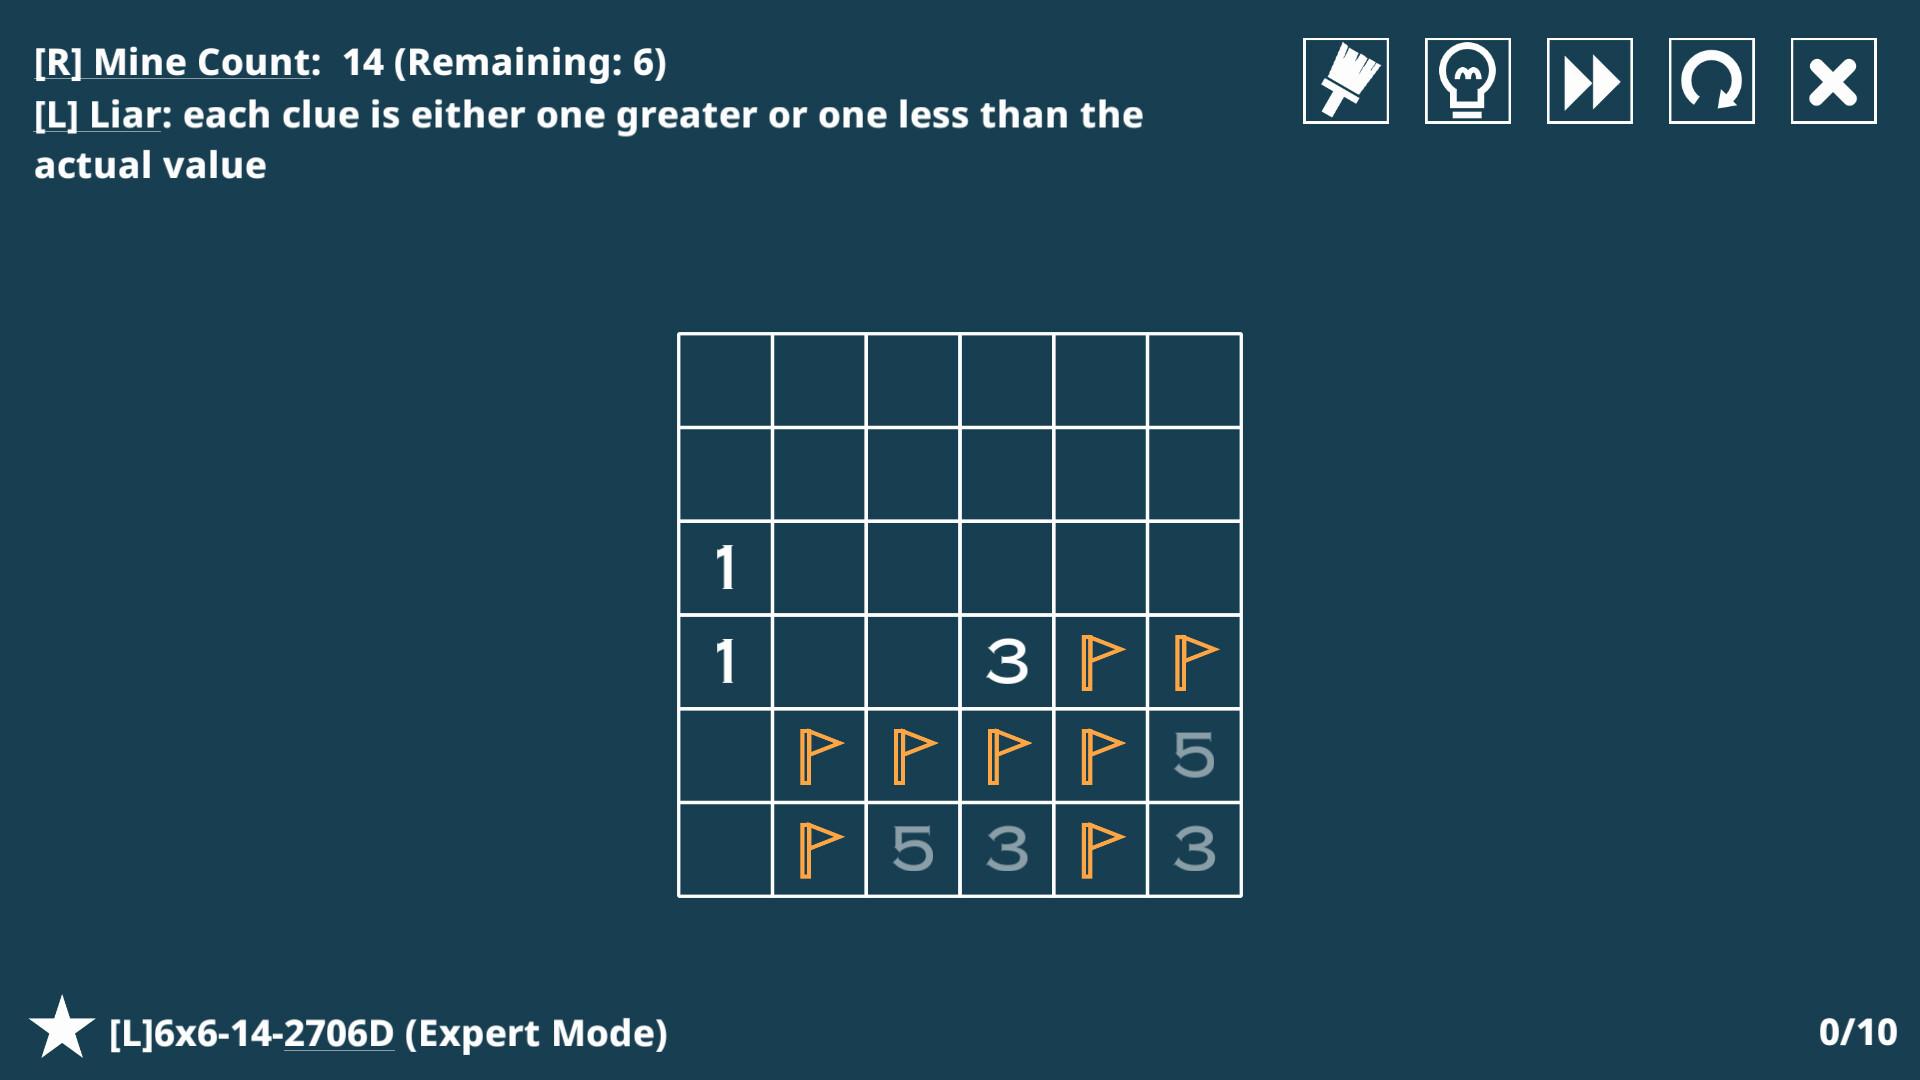 Screenshot №2 from game 14 Minesweeper Variants